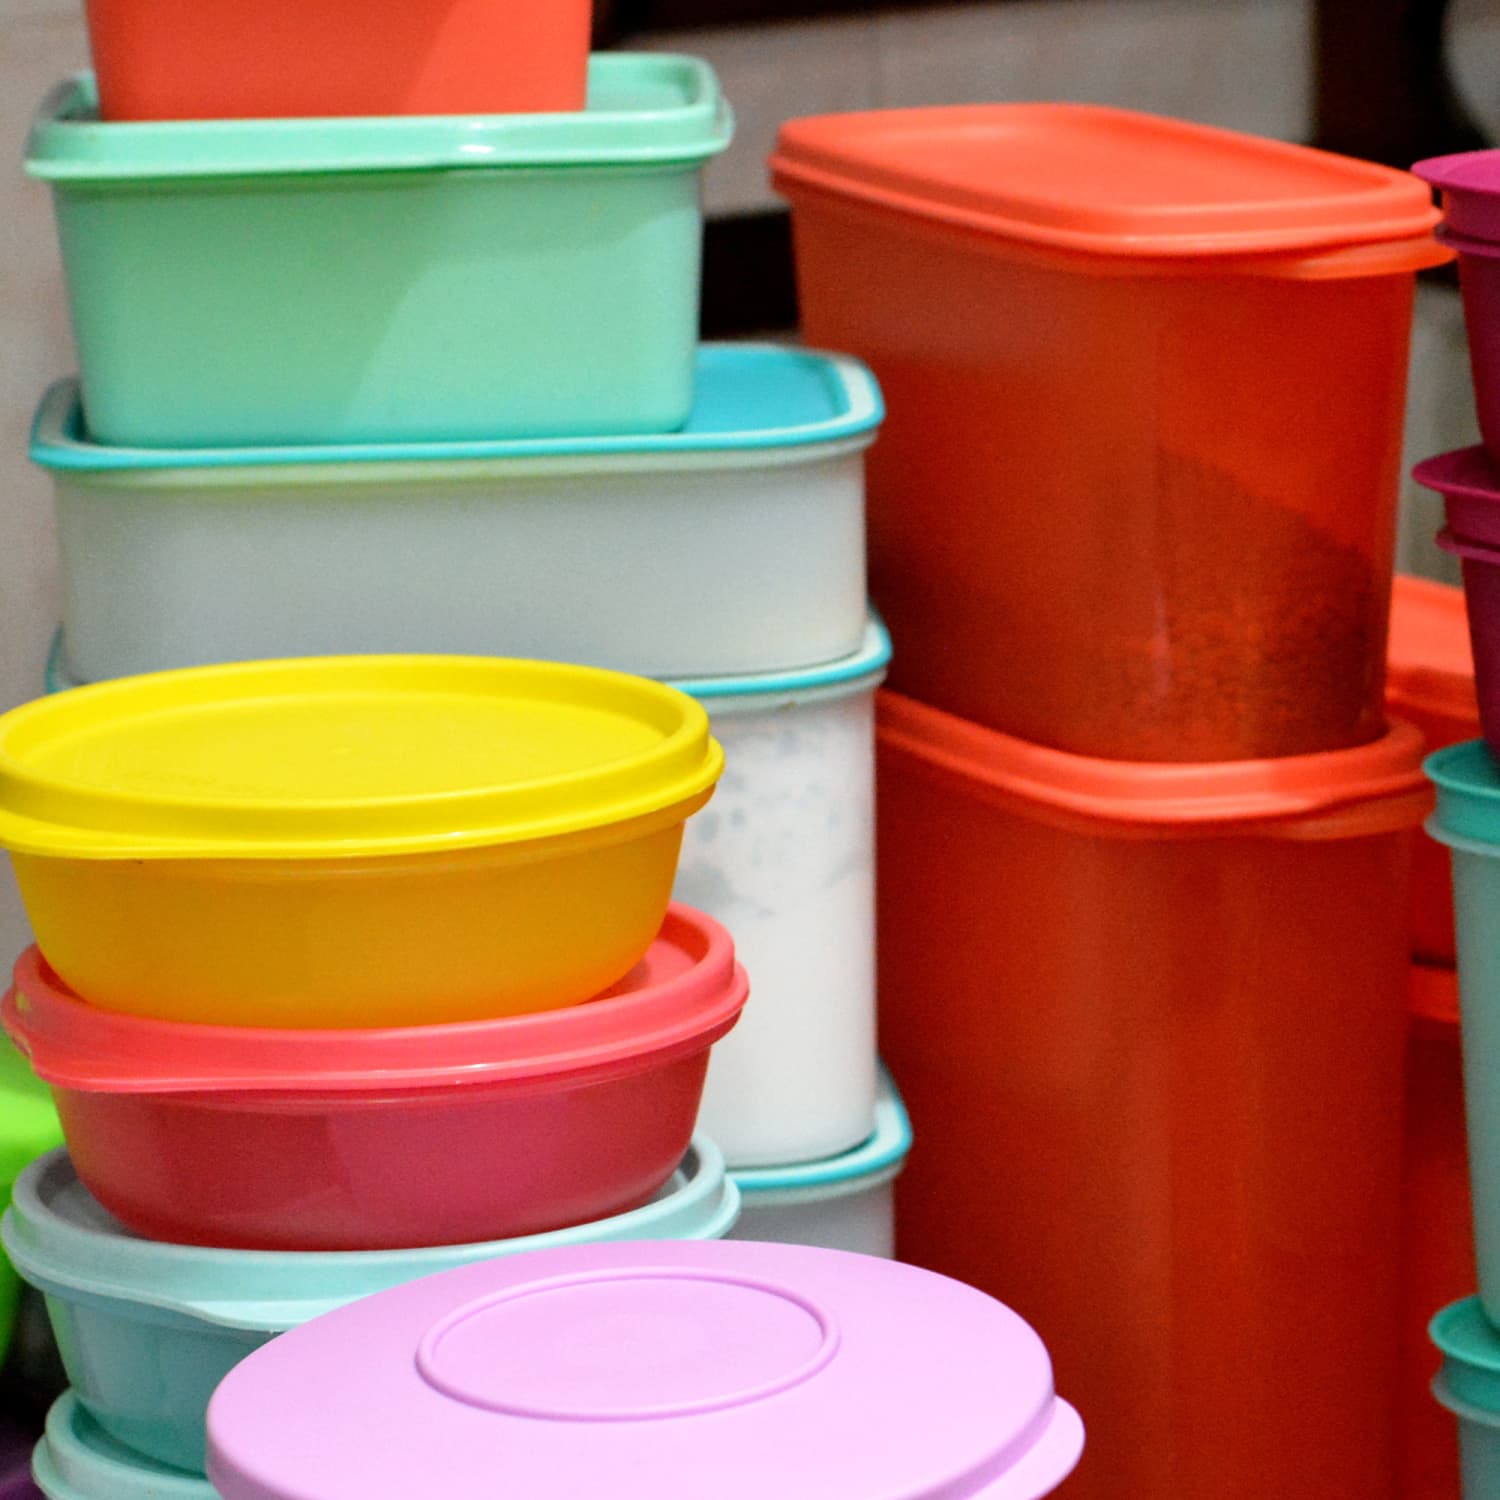 Food Storage Brand Tupperware Could Be Going Out of Business | Kitchn